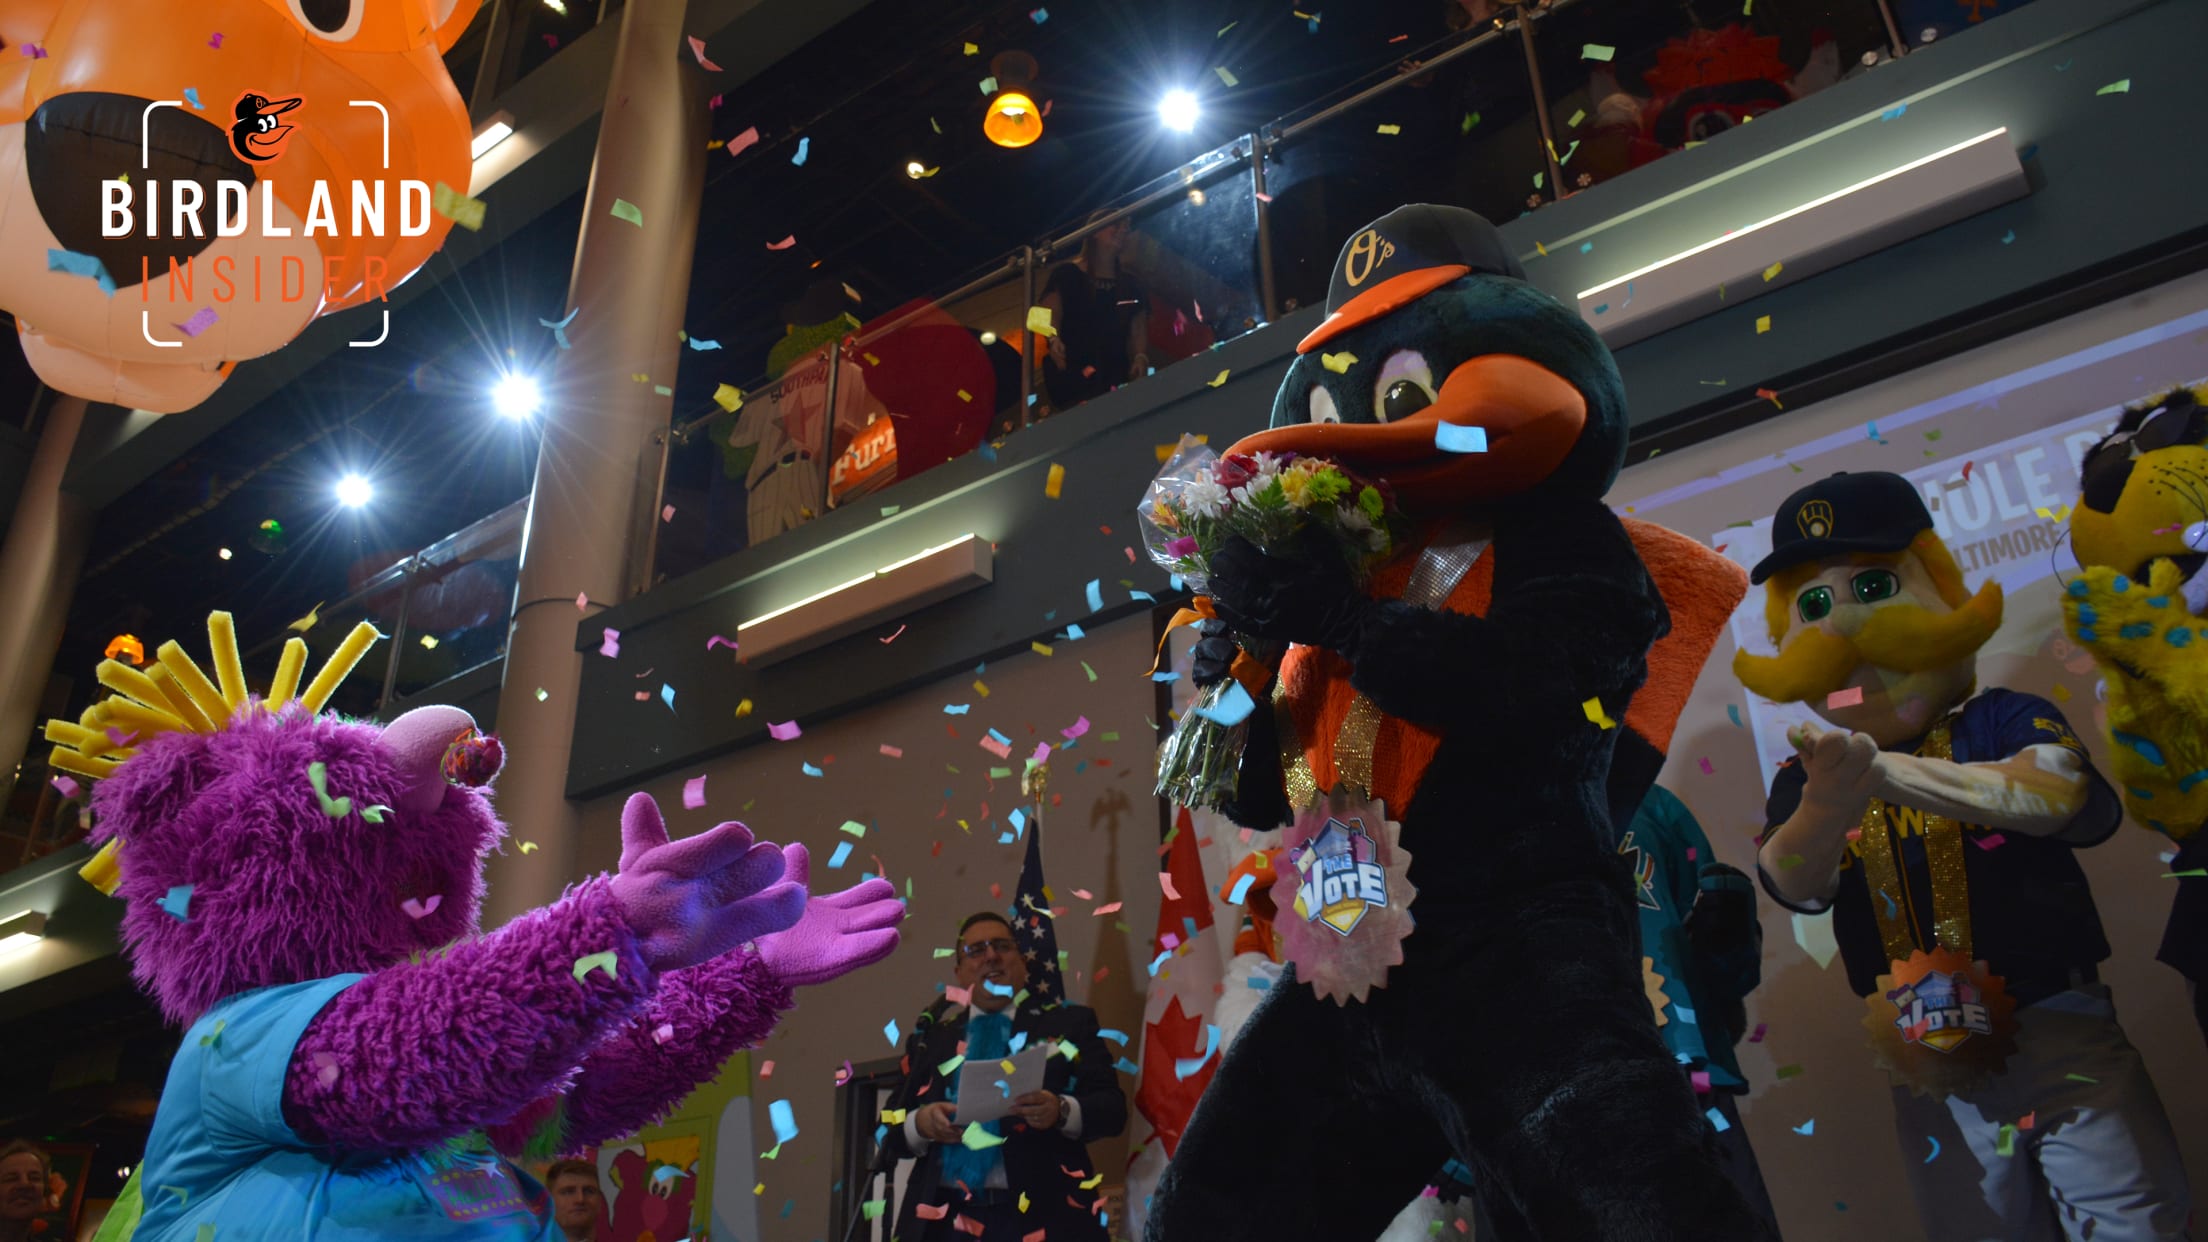 14 Fun Facts about the Orange's Hall of Famer Mascot 